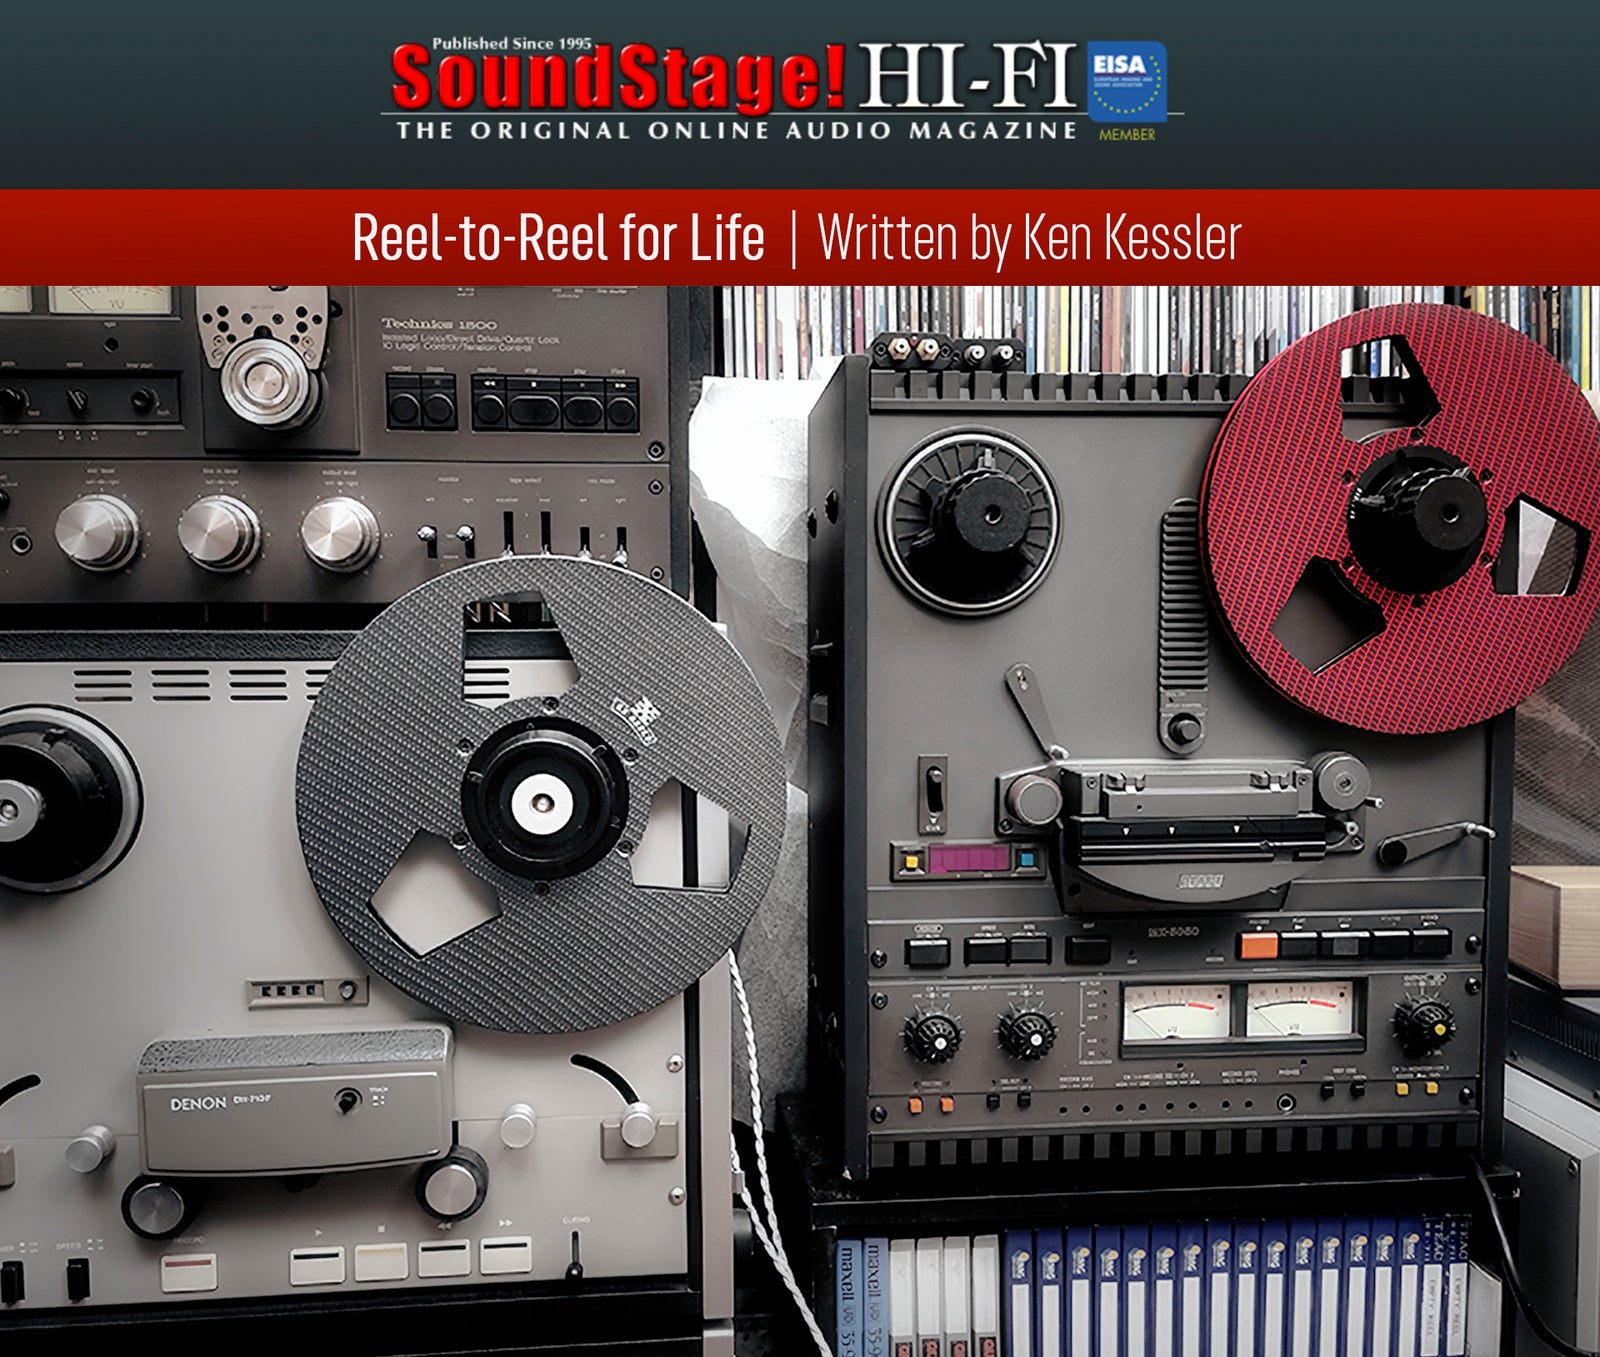 How To Use a Reel to Reel Player With a Streaming Service - RX Reels